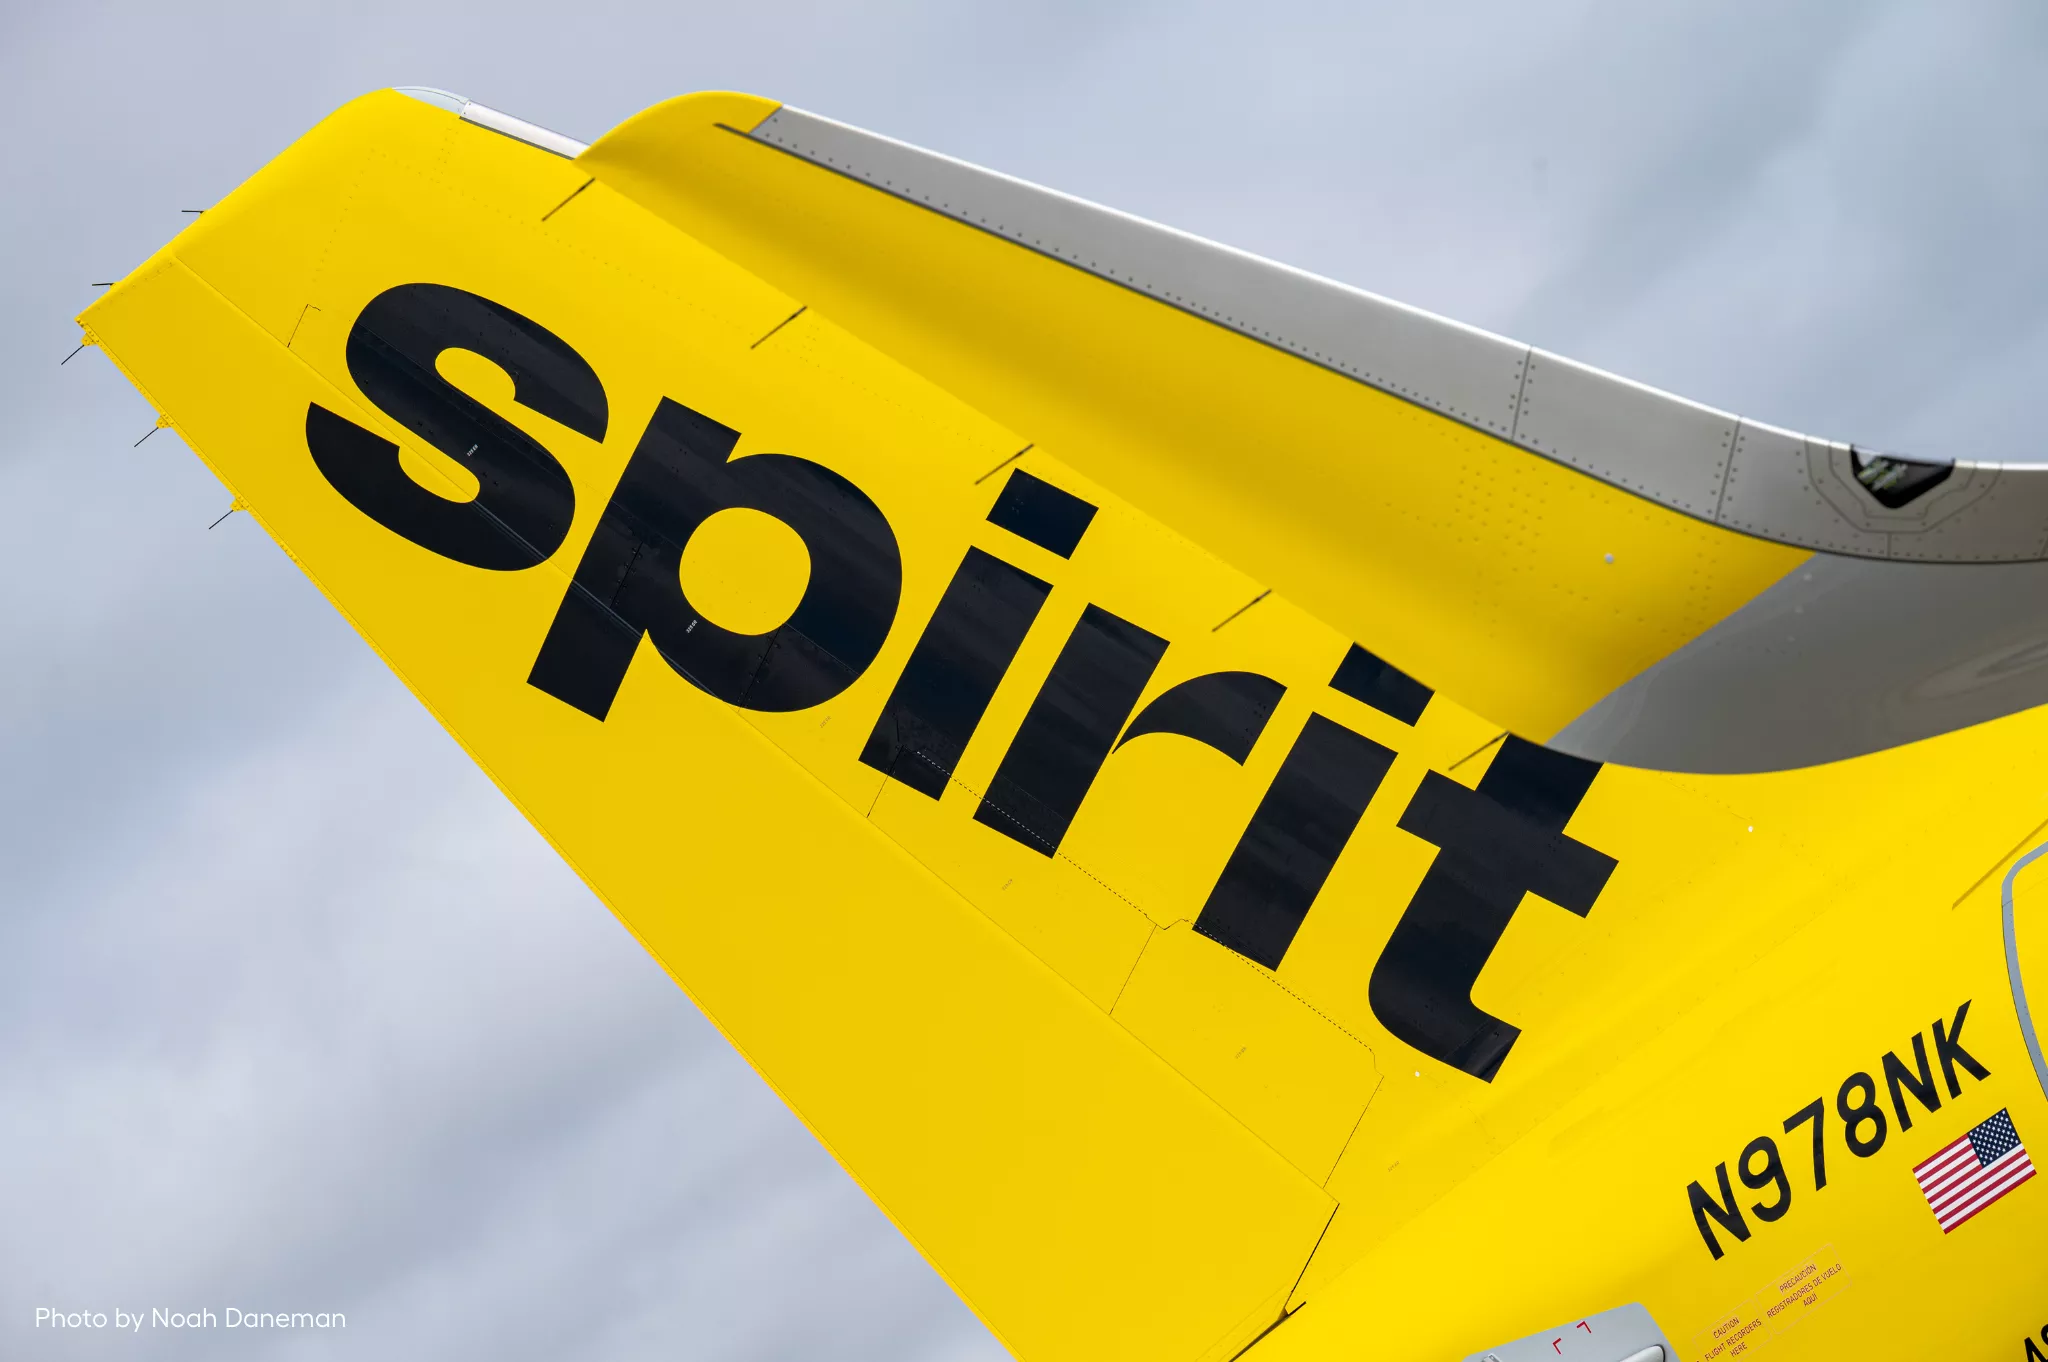 Spirit Airlines Aligns with Industry Standards by Raising Checked Bag Weight Limit and Extending Flight Credit Validity